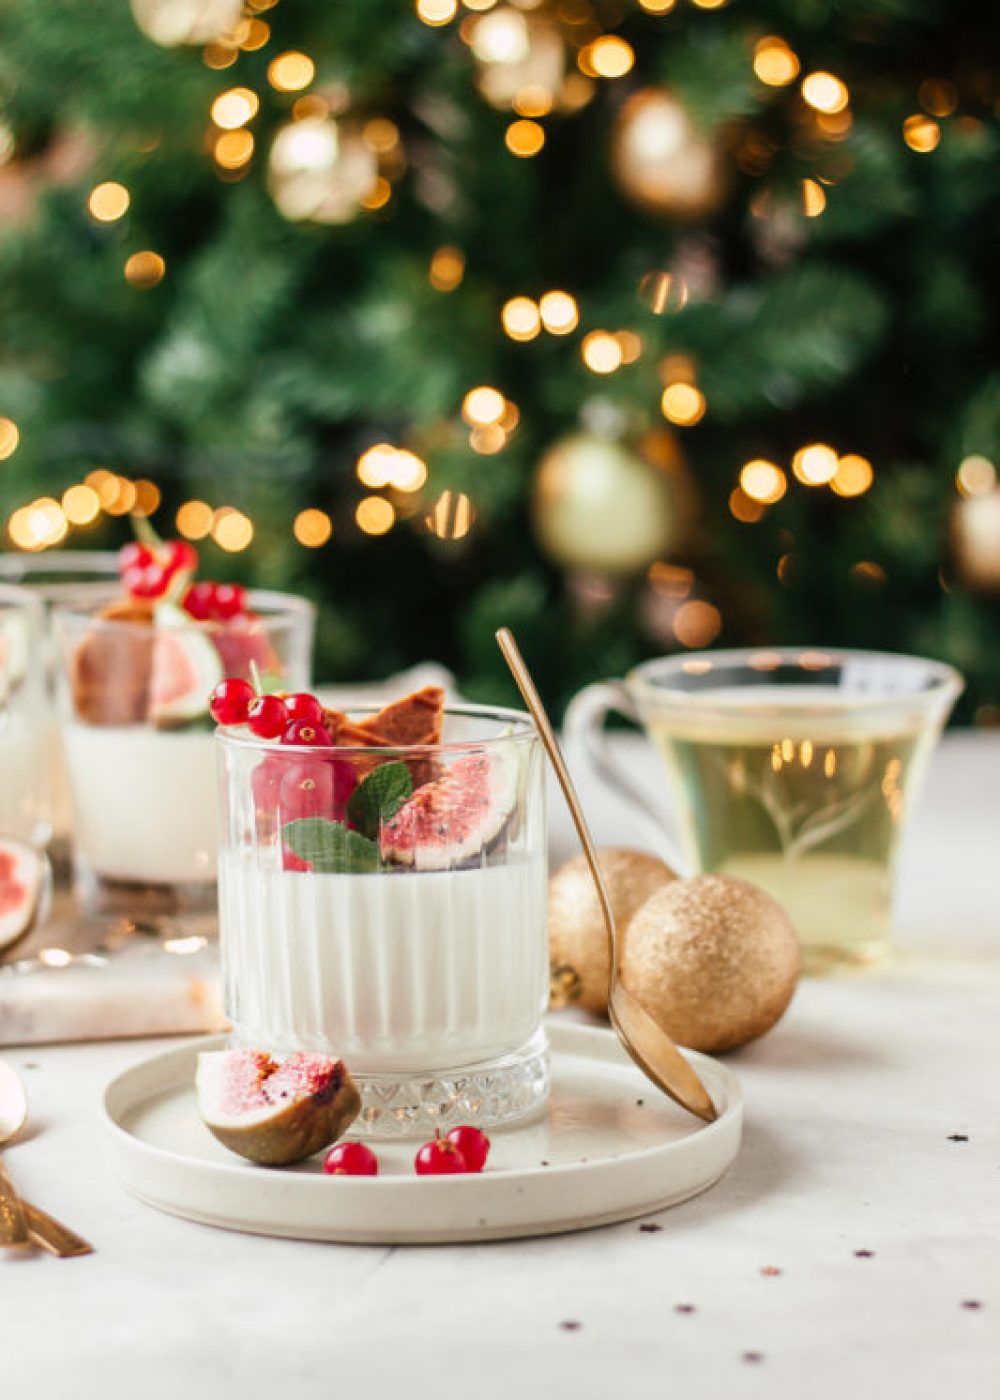 Christmas is coming: Panna cotta met thee